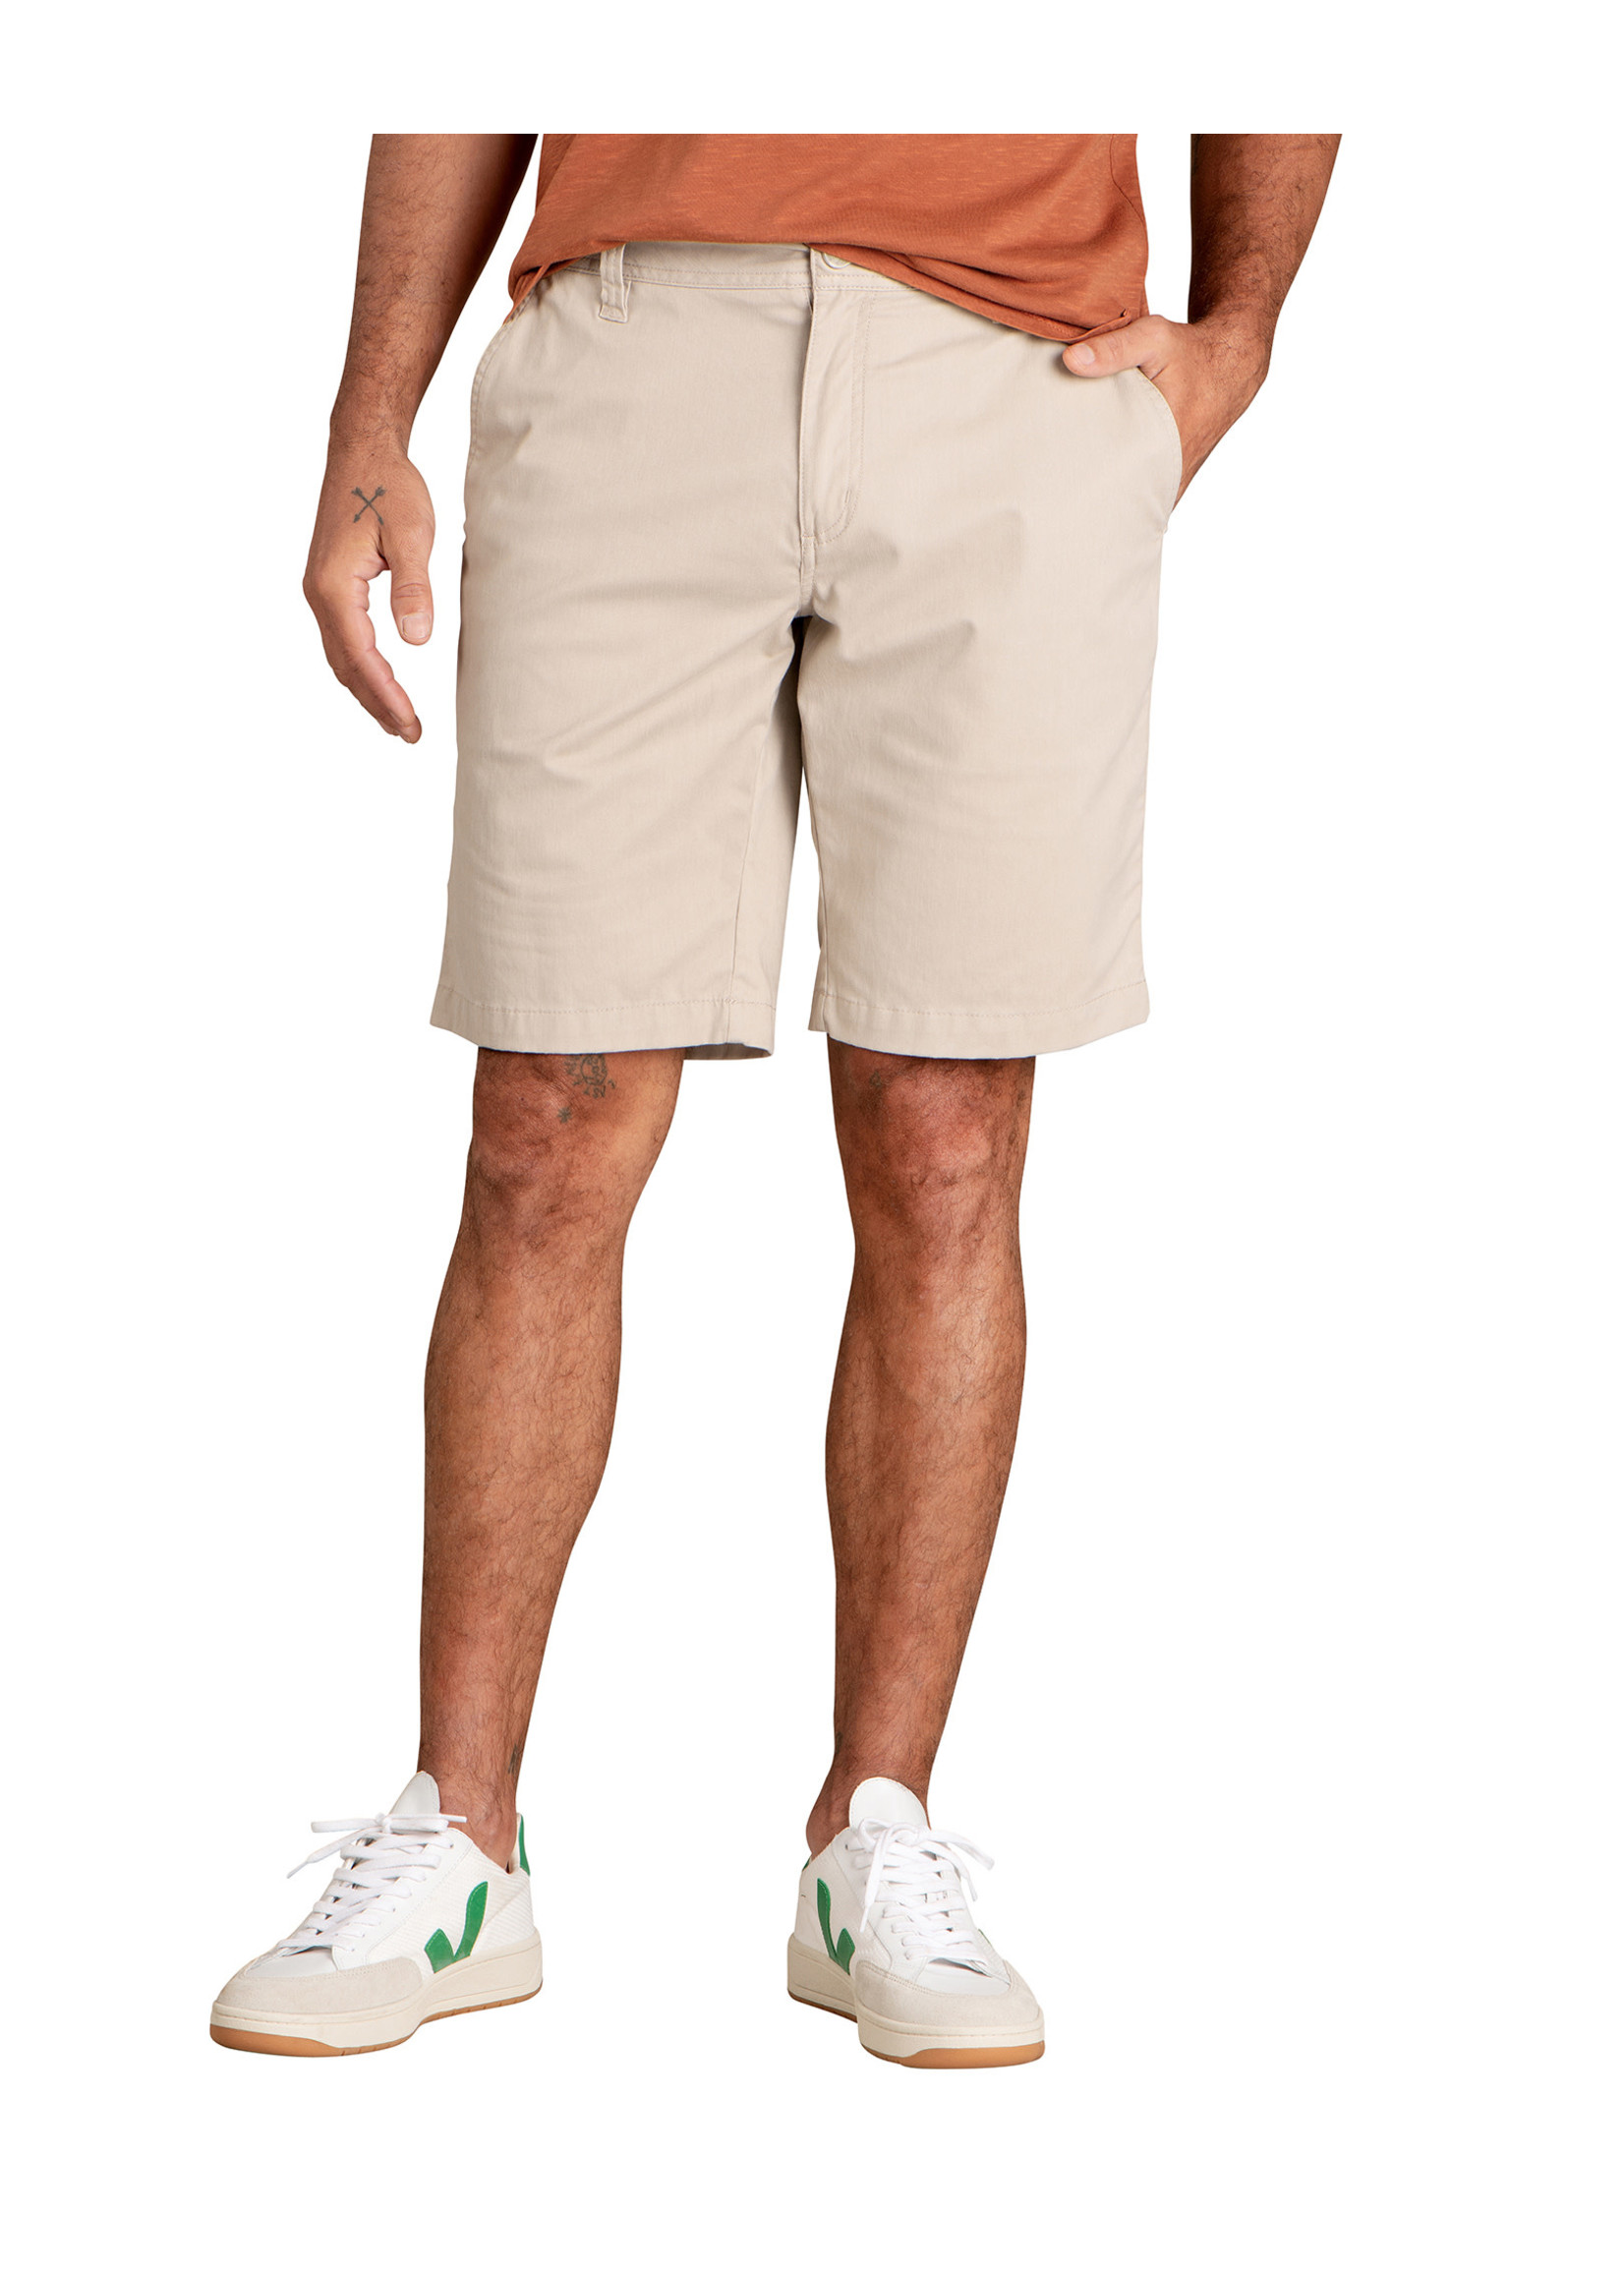 TOAD & CO Short Mission Ridge (Homme)